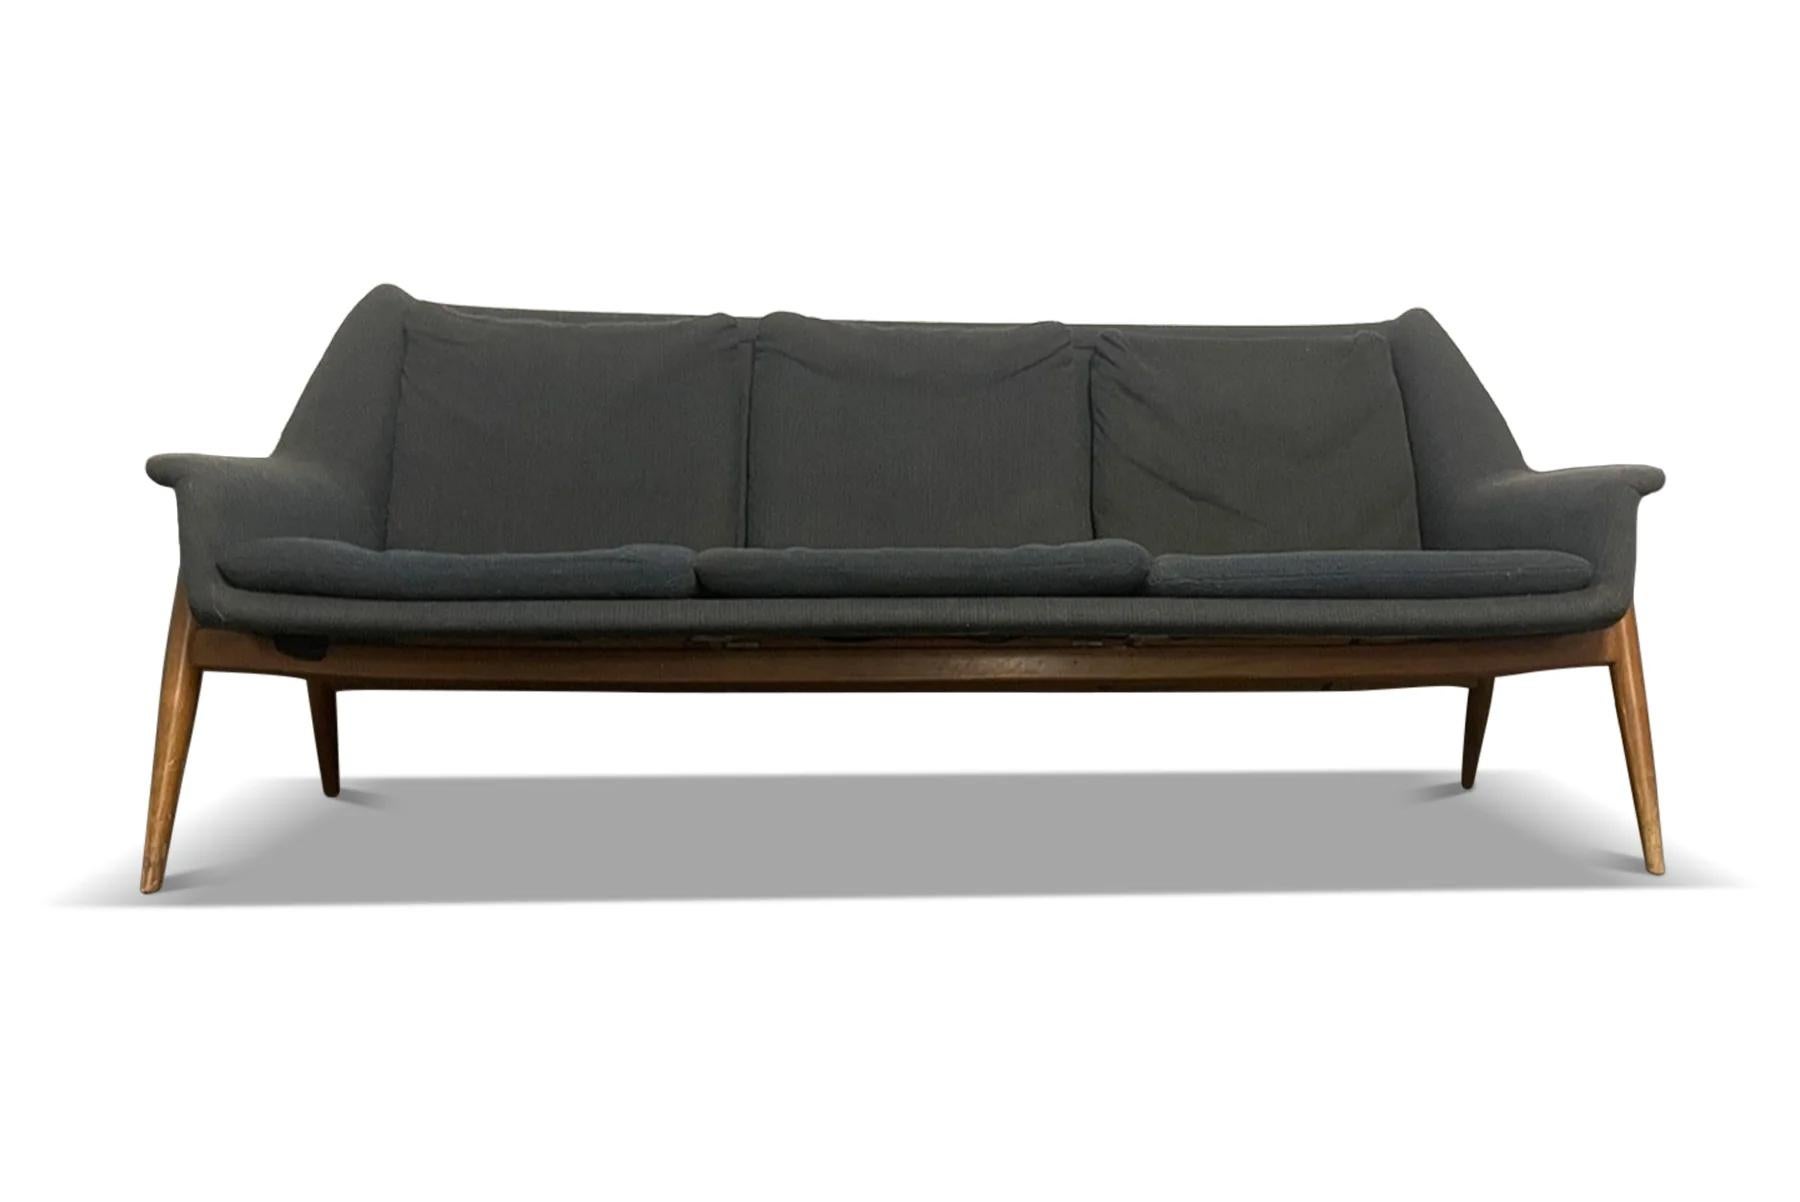 Pair of 1950s atomic lounge chairs + sofa in the manner of folke ohlsson For Sale 6